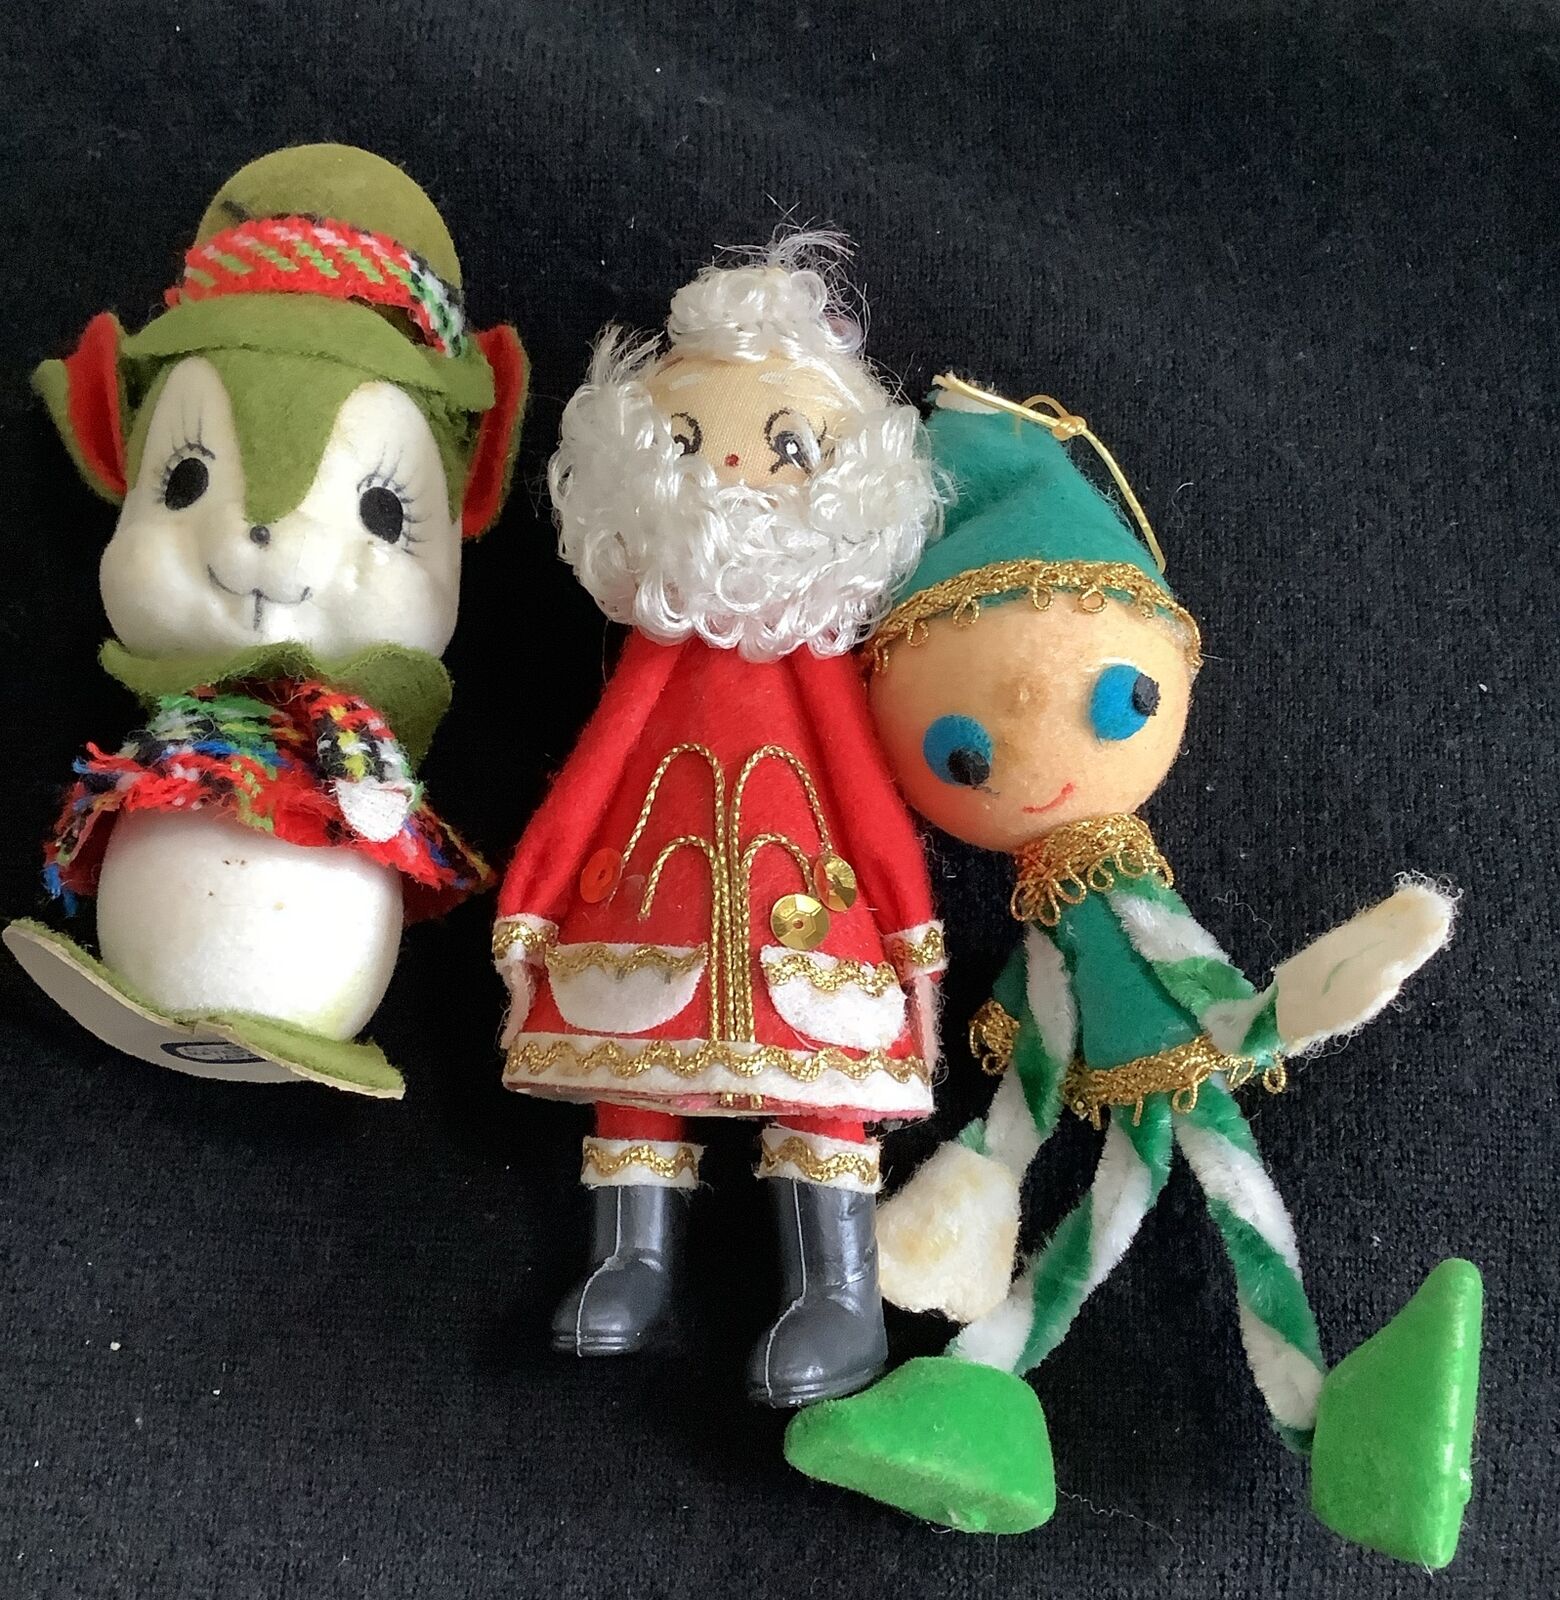 3 Vintage Christmas Ornaments Kitschy Made In Japan Santa Clause Elf Mouse